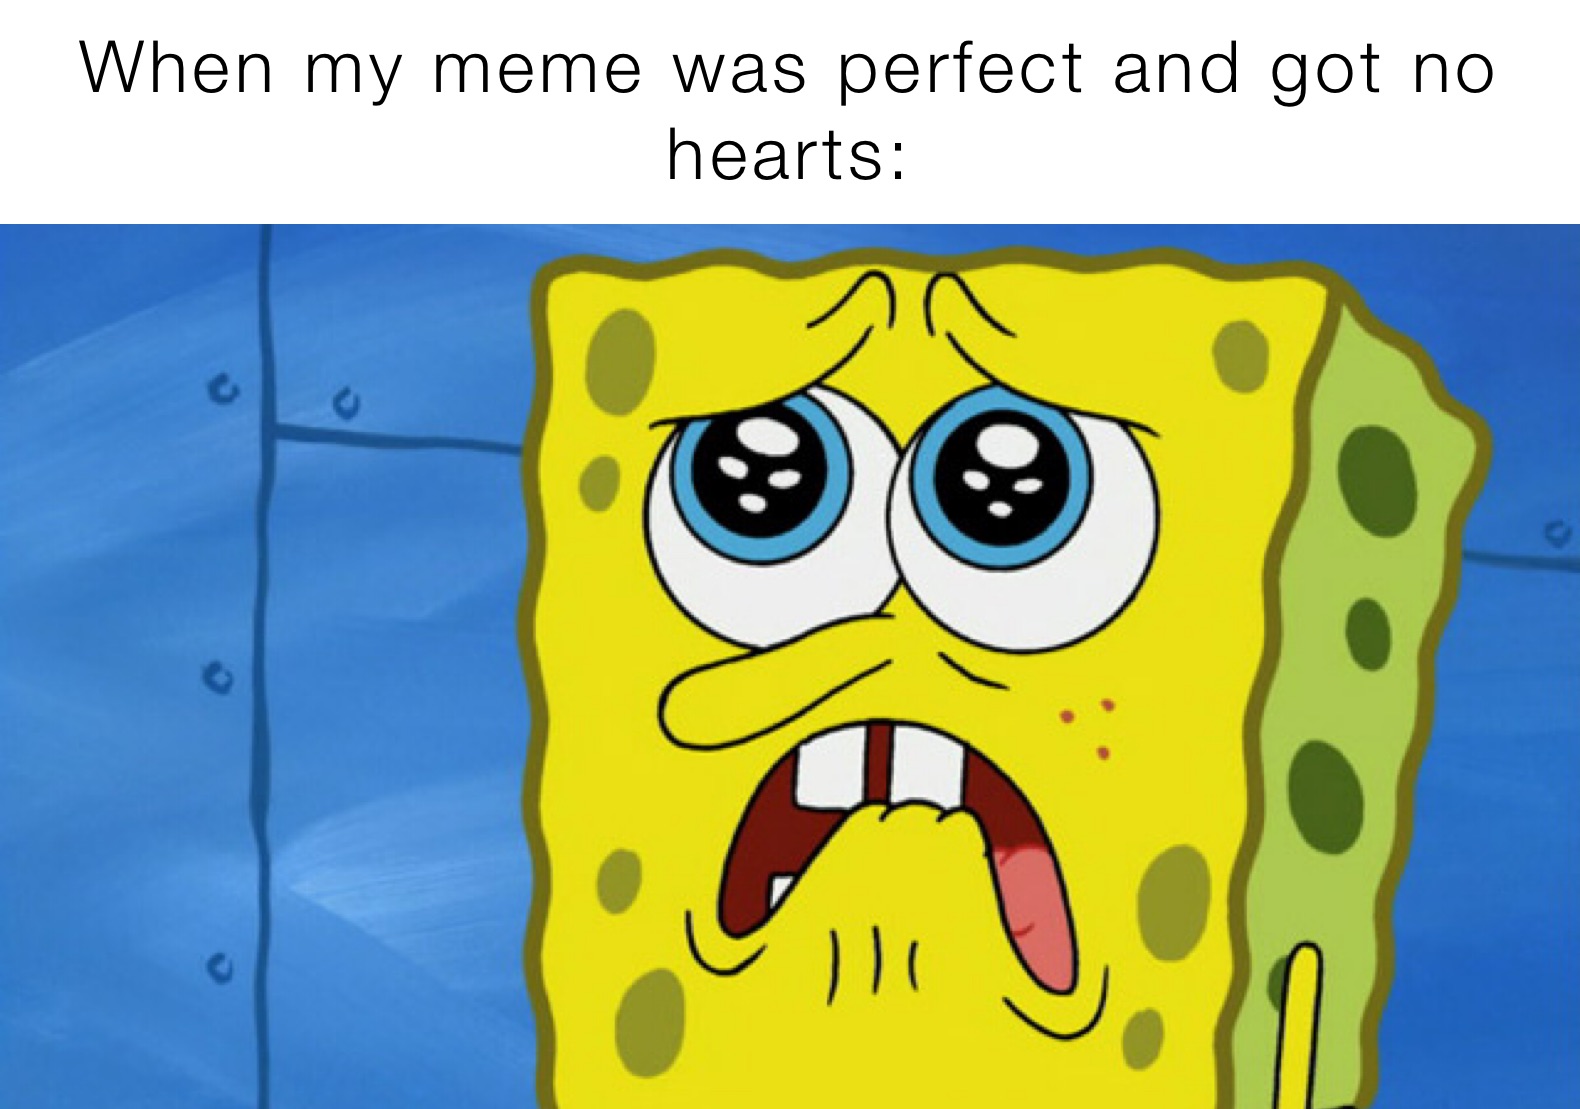 When my meme was perfect and got no hearts: